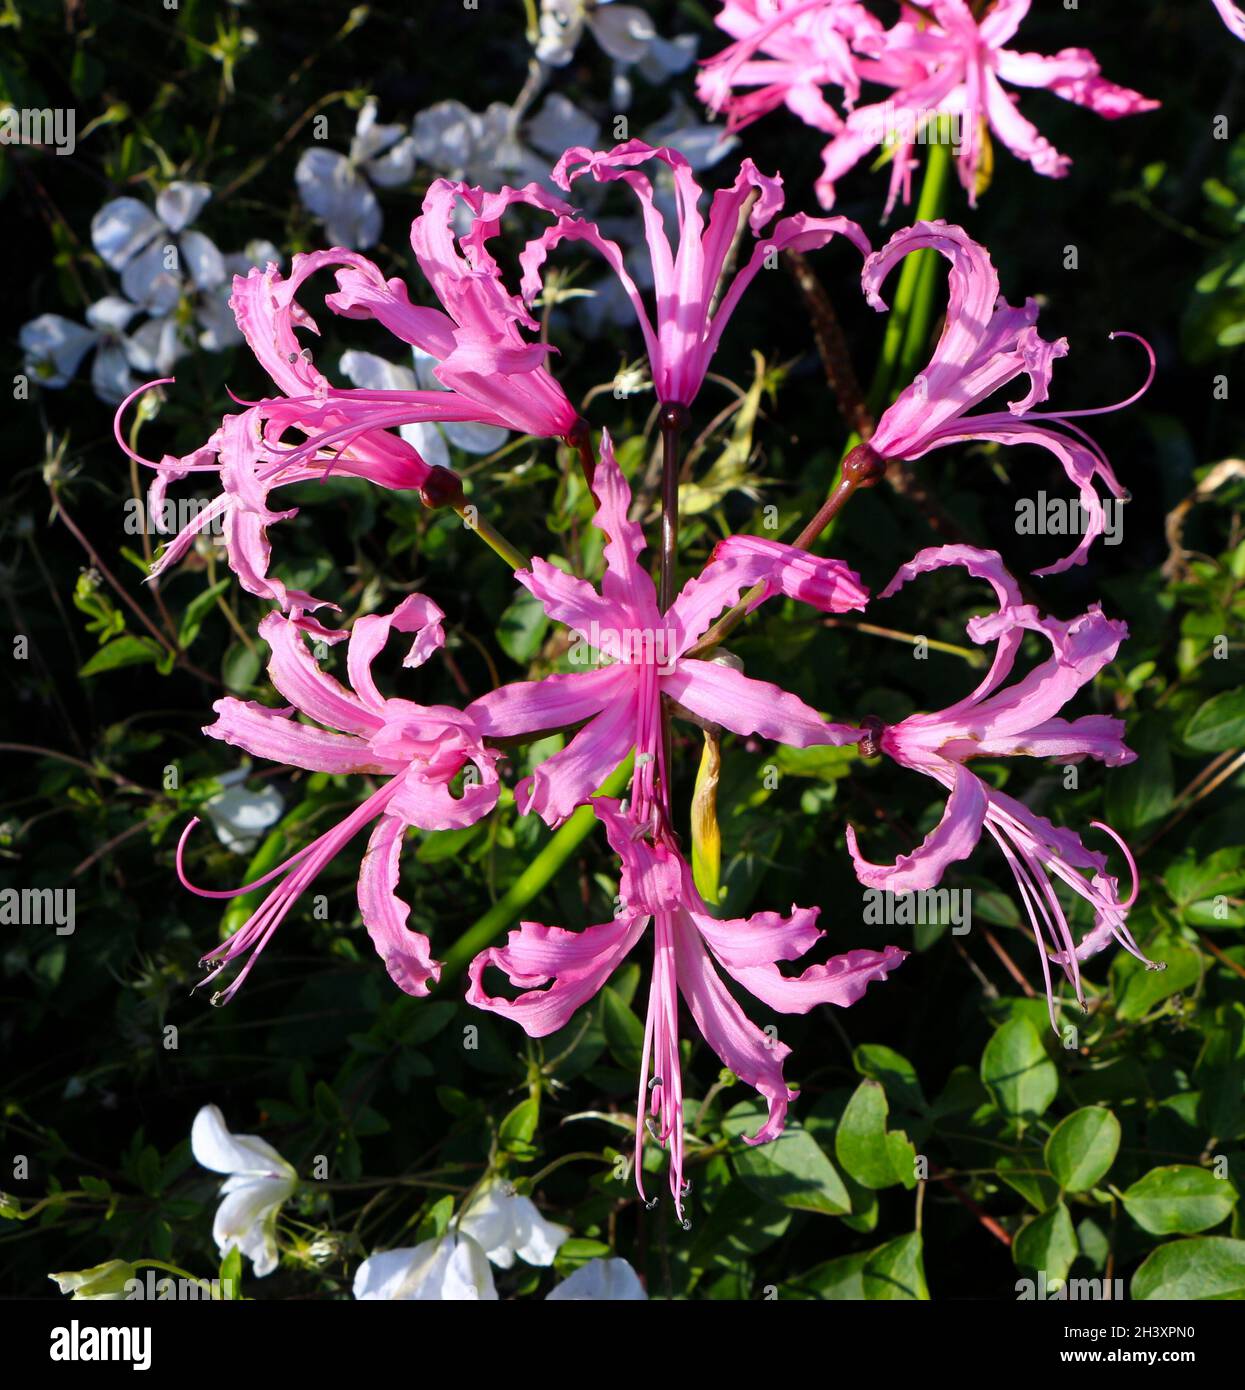 Guernsey lily Nerine bowdenii flowers in natural light Stock Photo